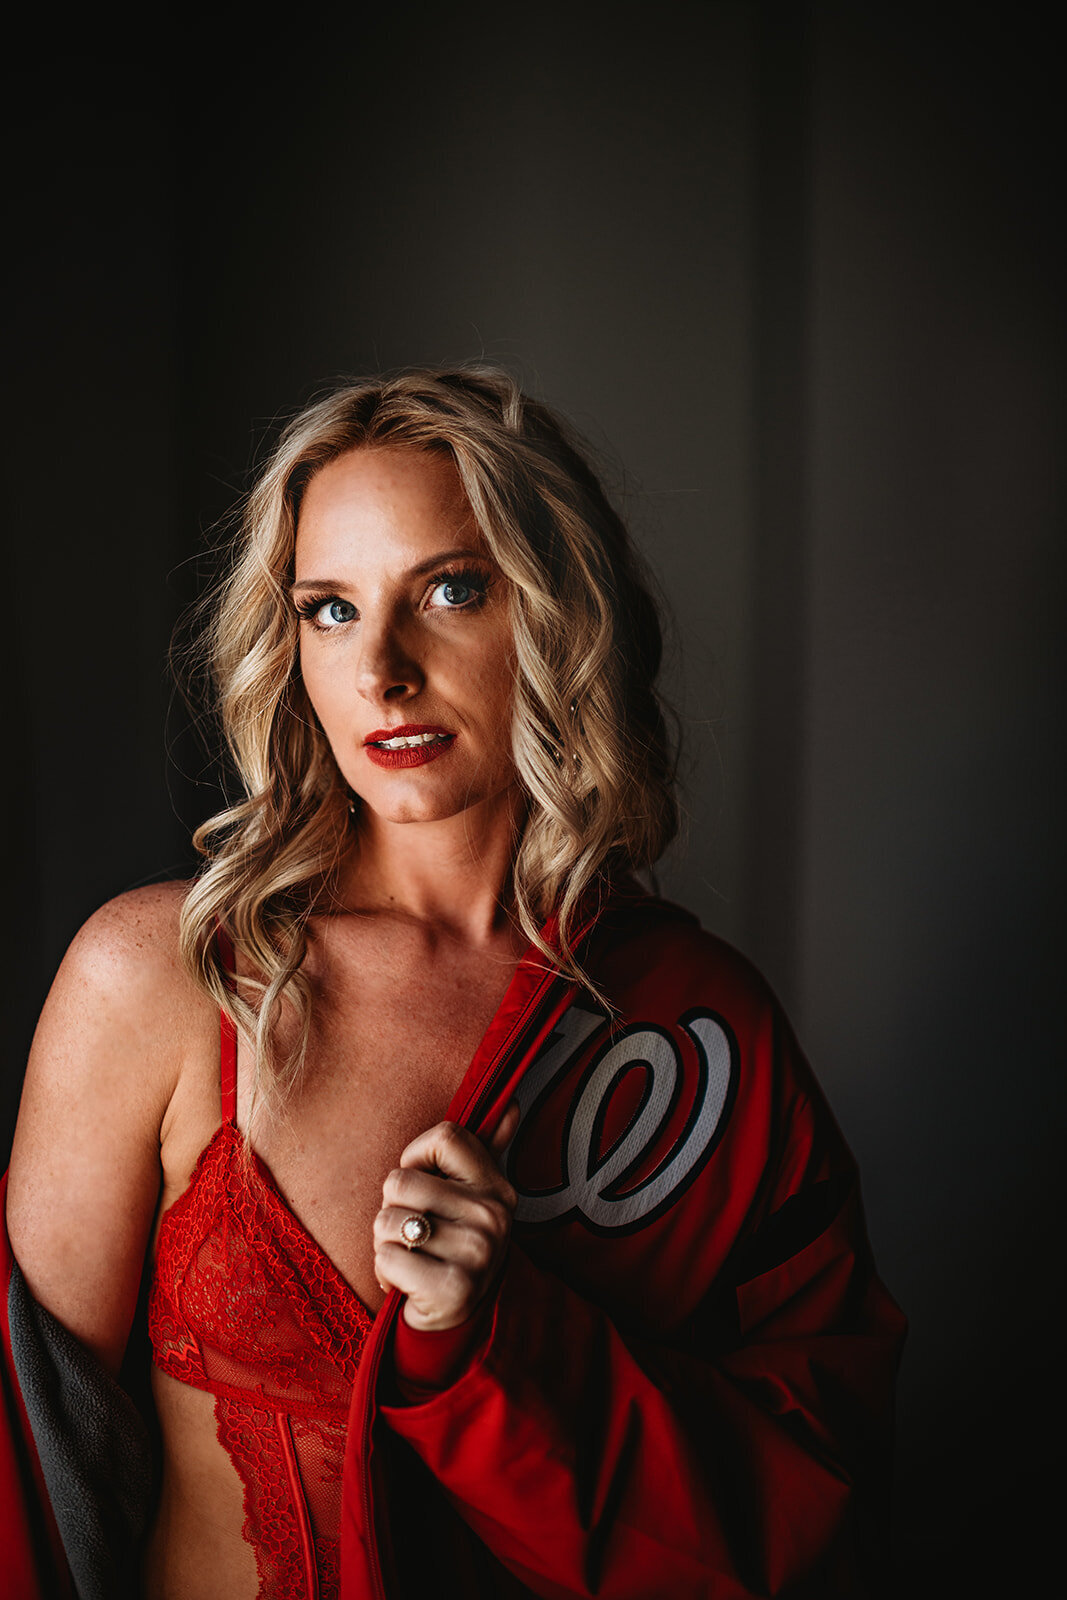 boudoir pictures with woman wearing a red lace bra and a jersery draped over her shoulders